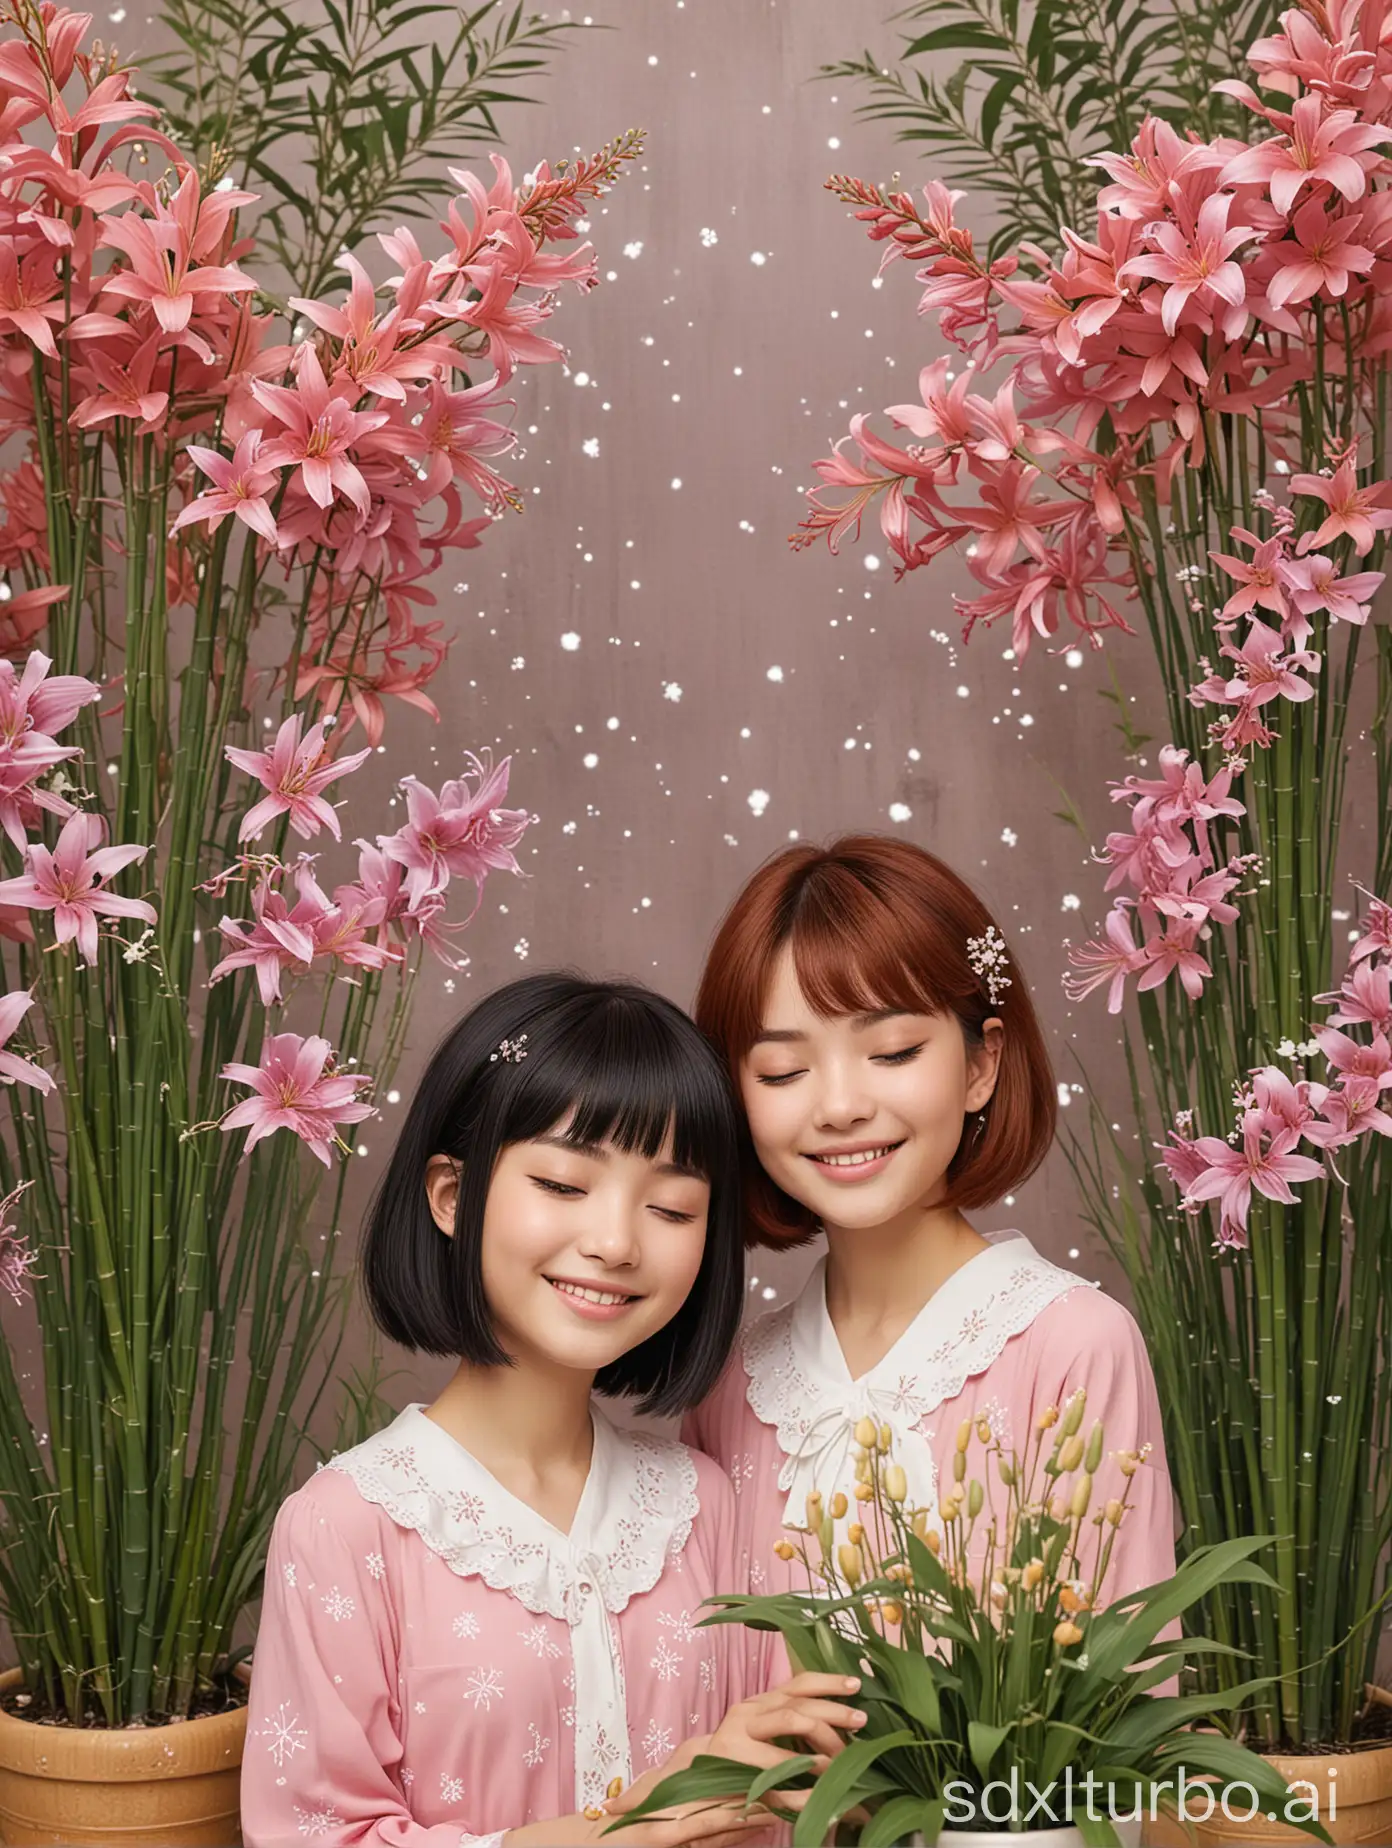 2girls, artist name, bamboo, bangs, bare tree, berry, black hair, bouquet, branch, closed eyes, daisy, dandelion, floral background, flower, flower field, flower pot, ivy, leaf, leaf background, lily \(flower\), lily of the valley, long hair, long sleeves, multiple girls, orange flower, palm tree, pink background, plant, potted plant, purple flower, red flower, short hair, smile, snowflakes, spider lily, tanabata, tanzaku, tree, tulip, vase, white flower, wisteria, yellow flower